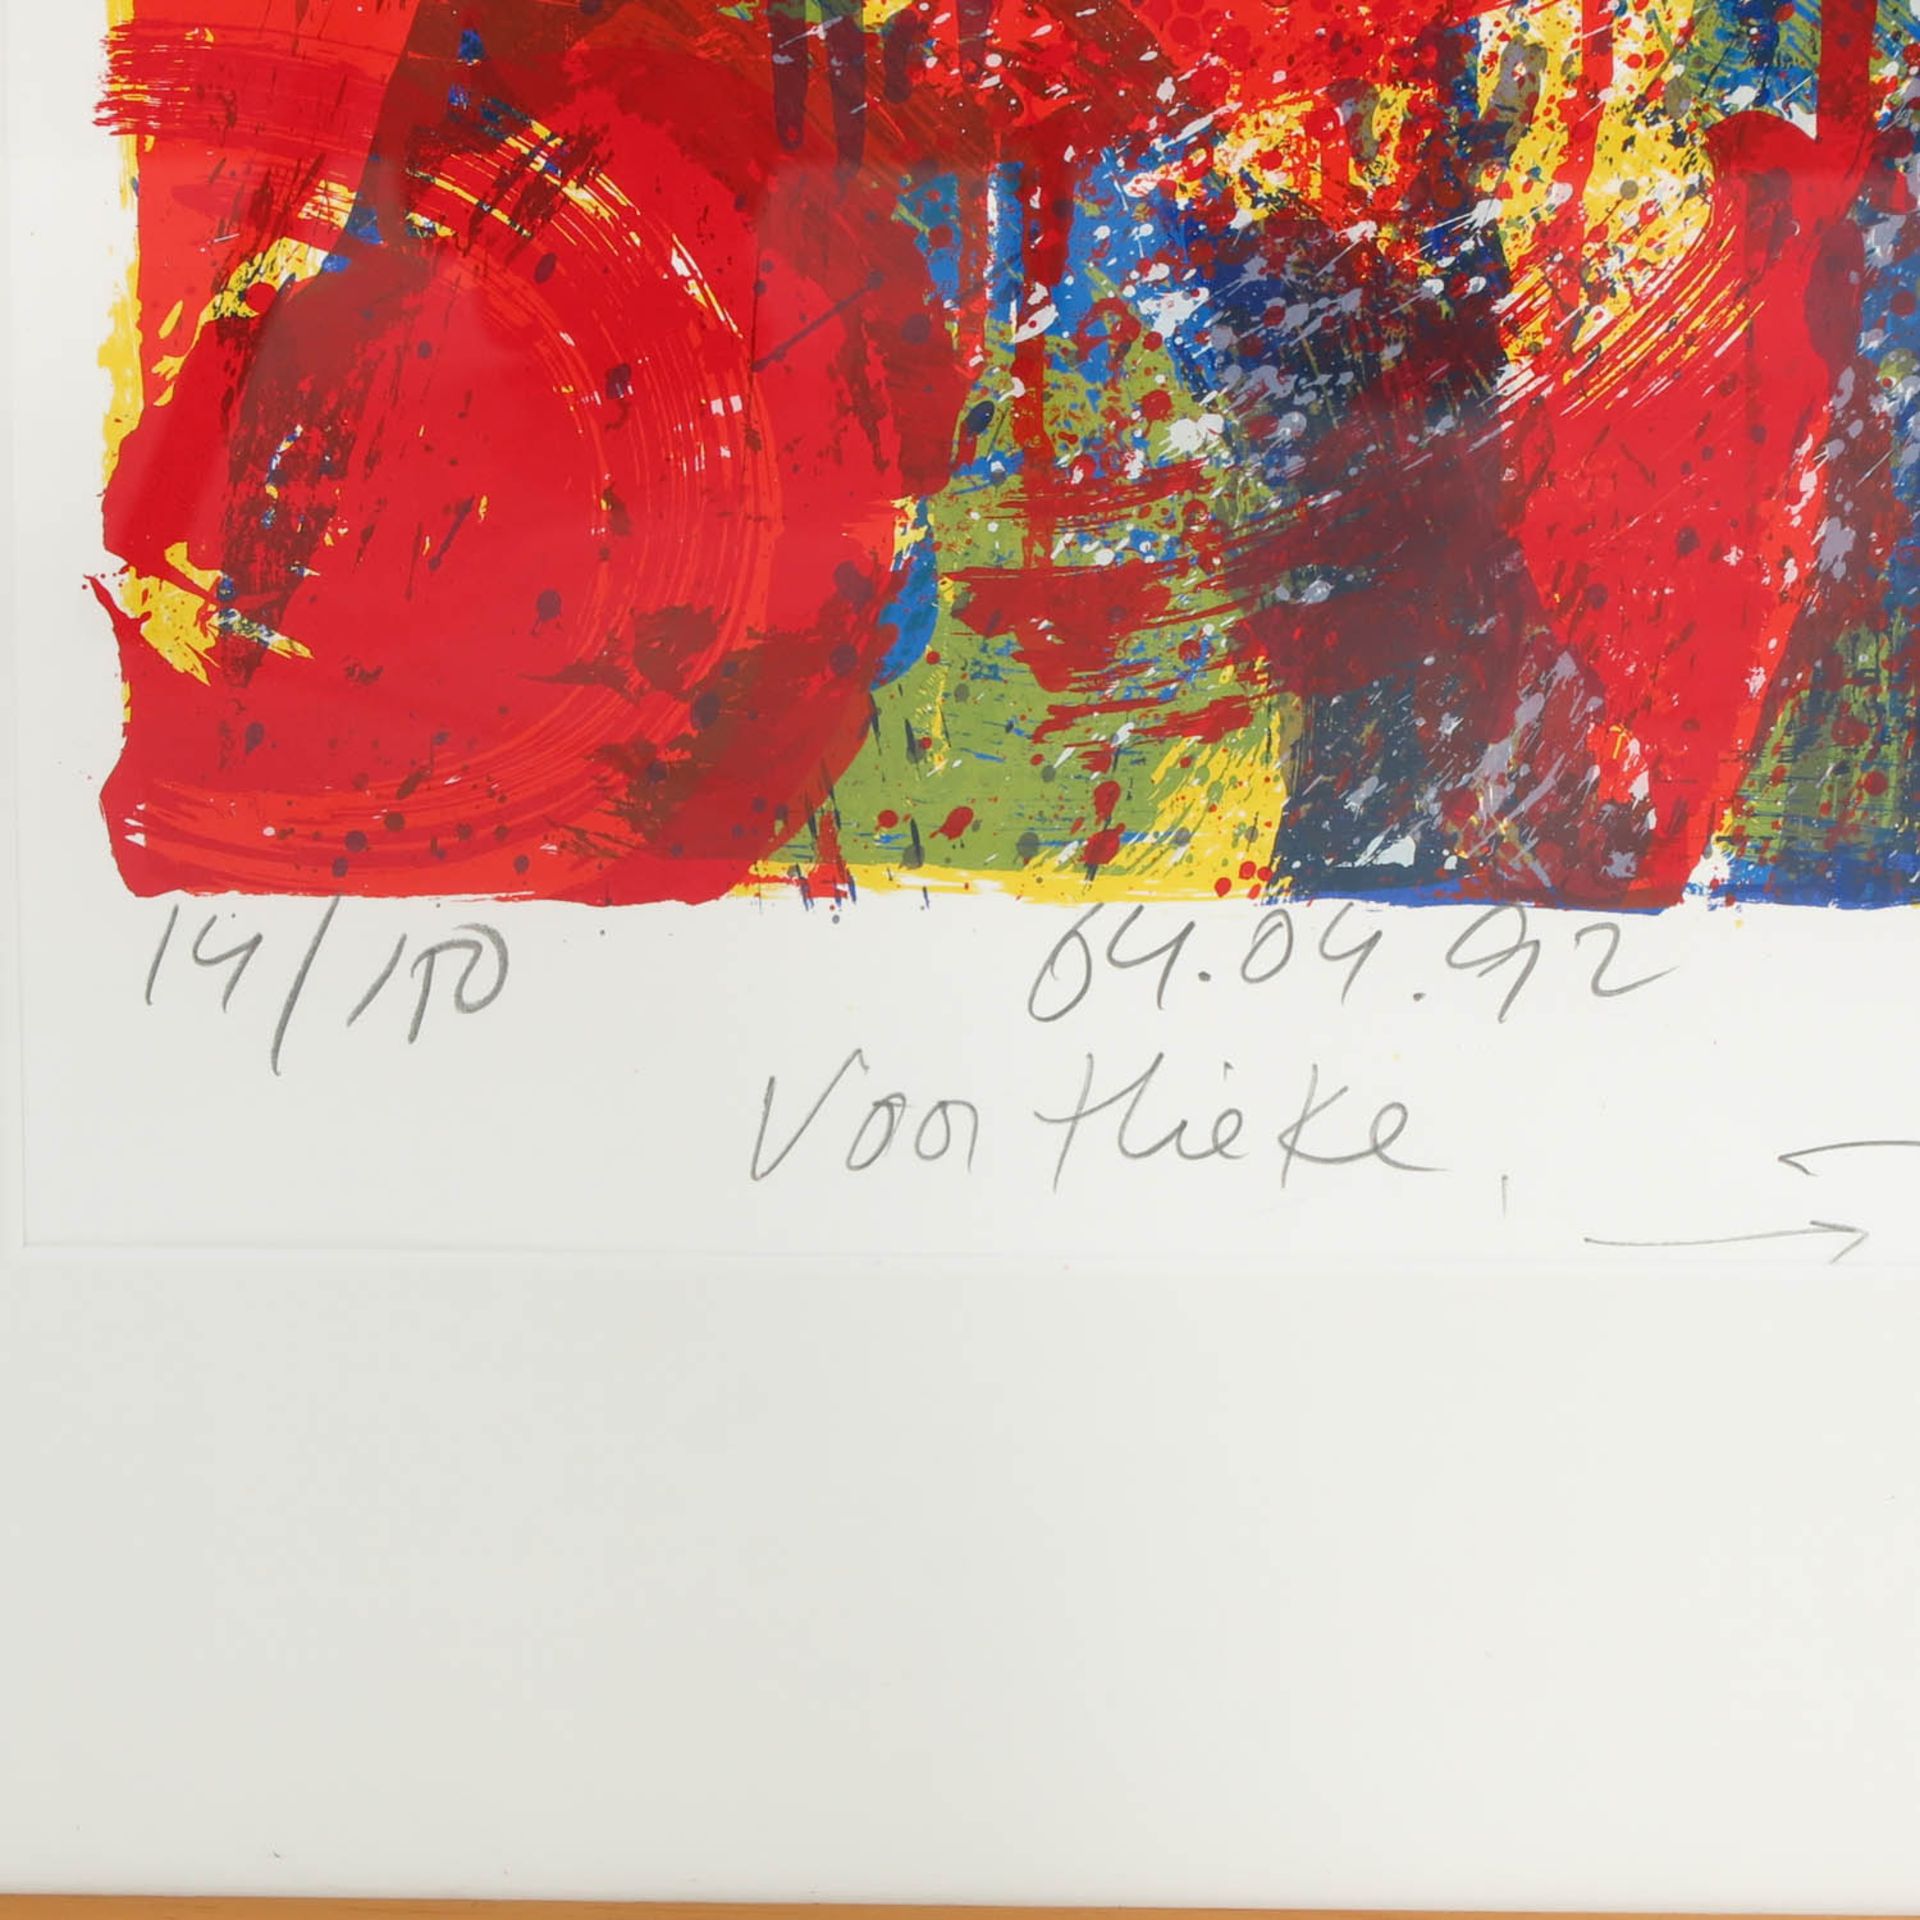 A Signed and Numbered Lithograph by Jan Cremer - Image 4 of 7